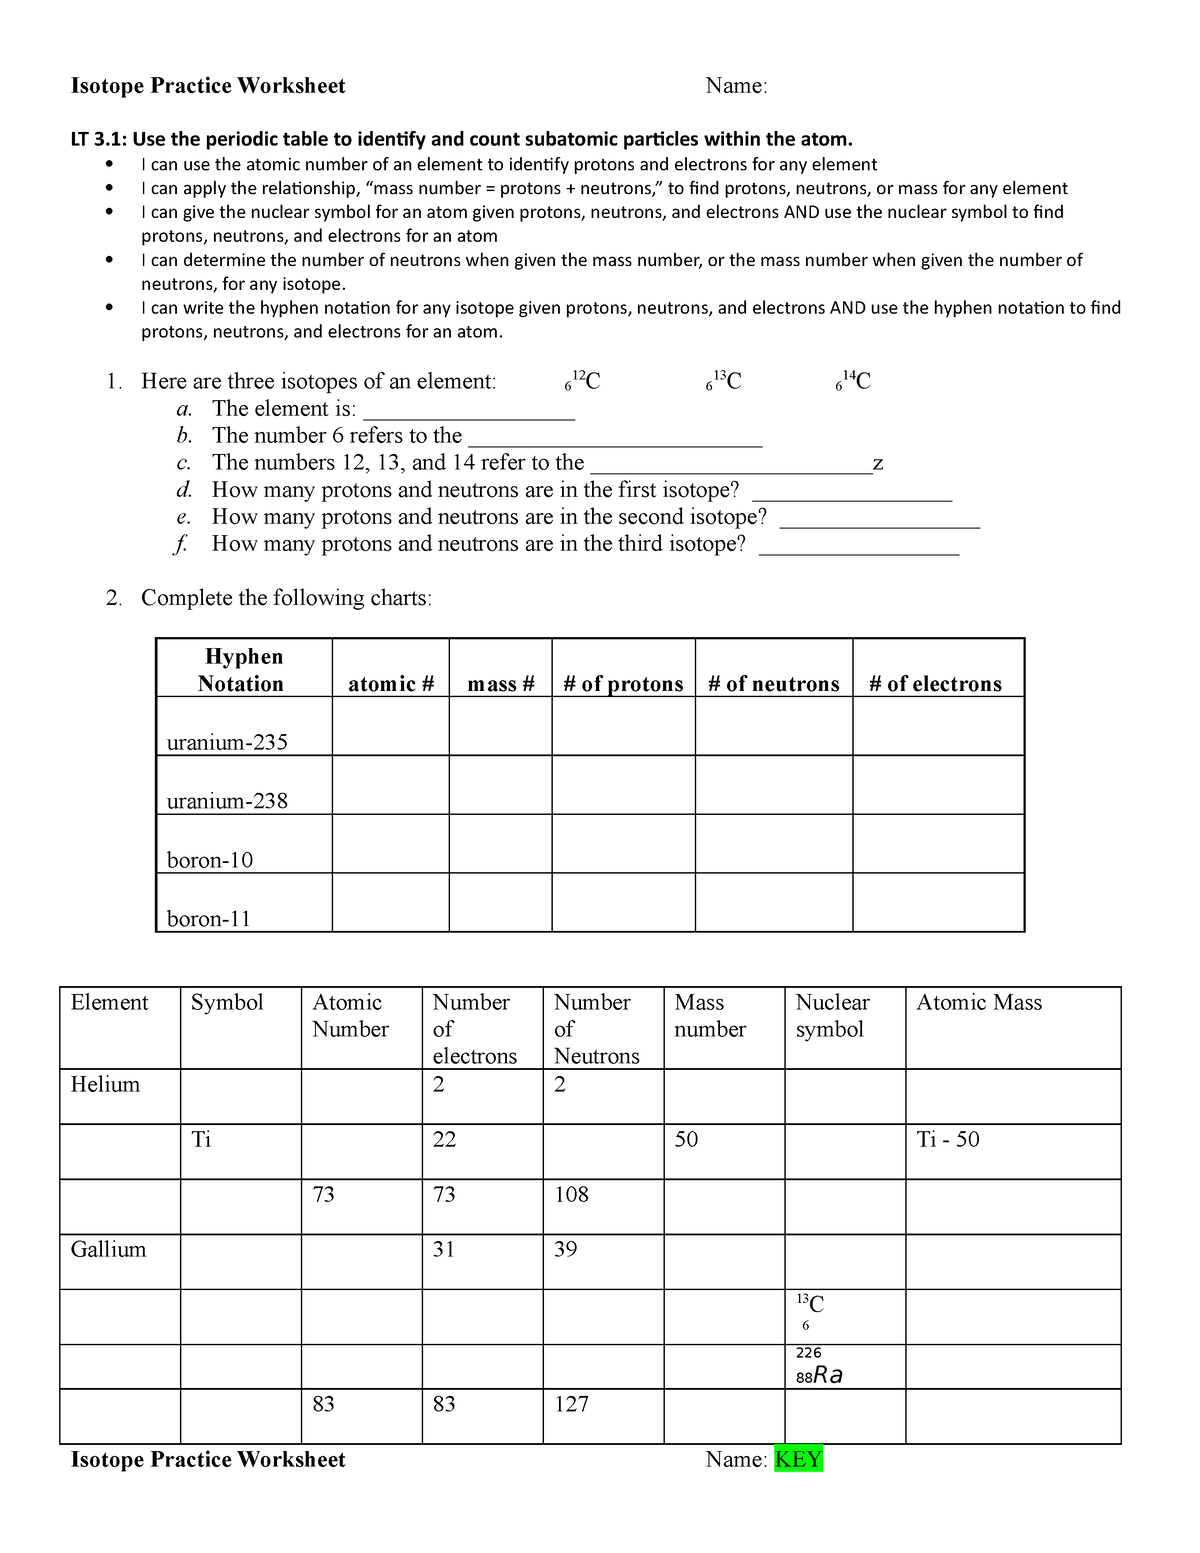 W isotope Practice And KEY Isotope Practice Worksheet Name LT 3 Use The Periodic Table To